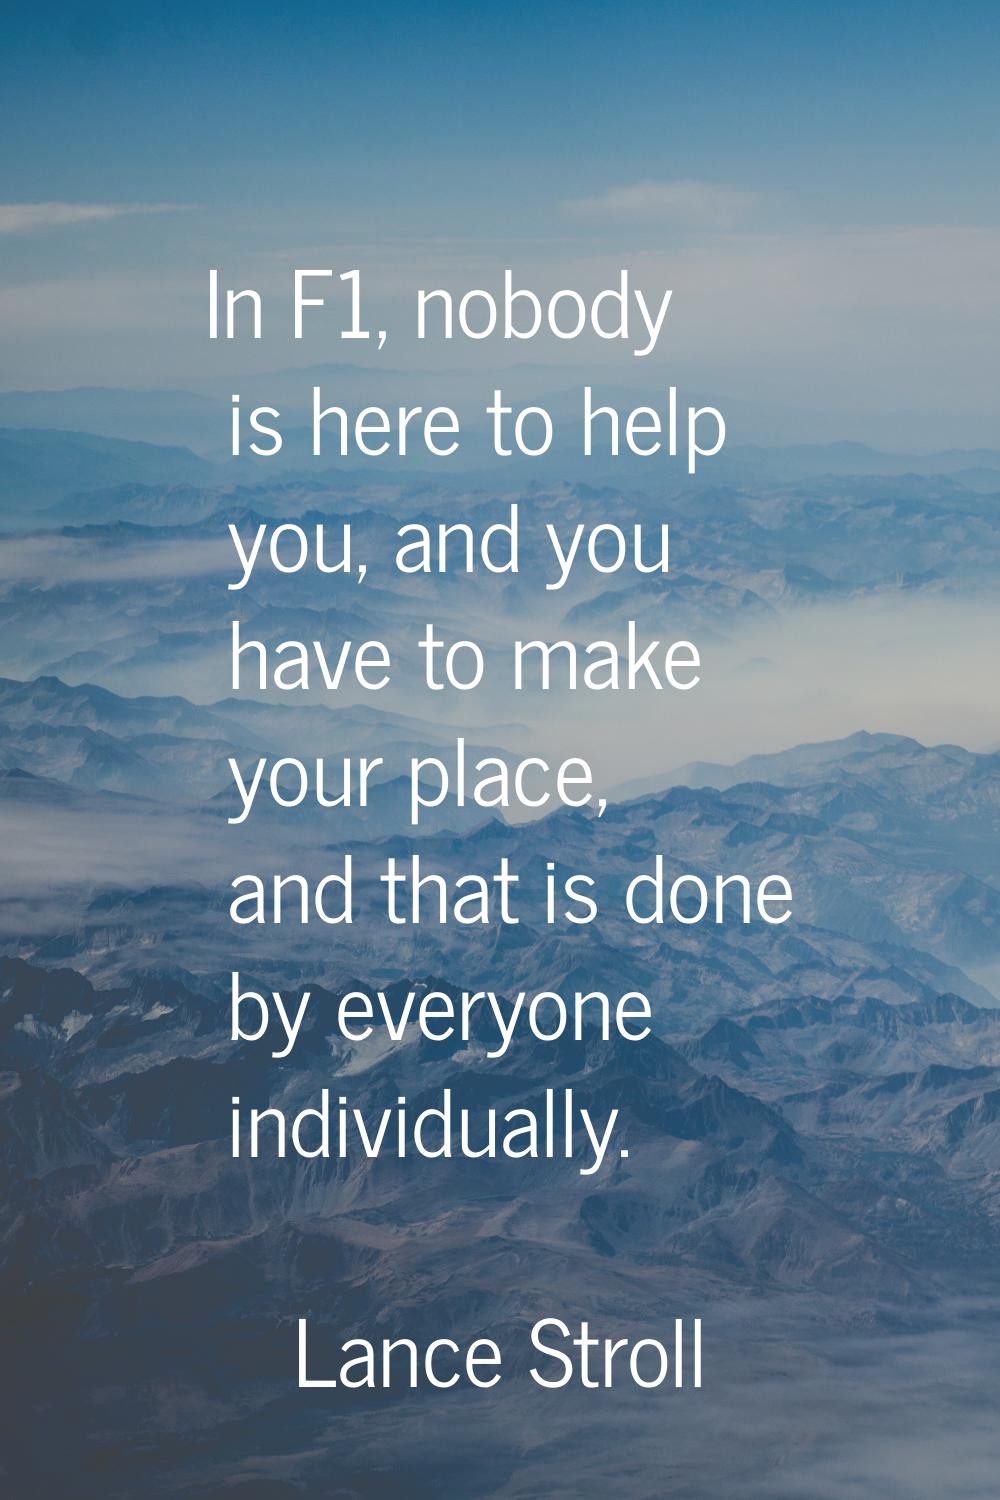 In F1, nobody is here to help you, and you have to make your place, and that is done by everyone in